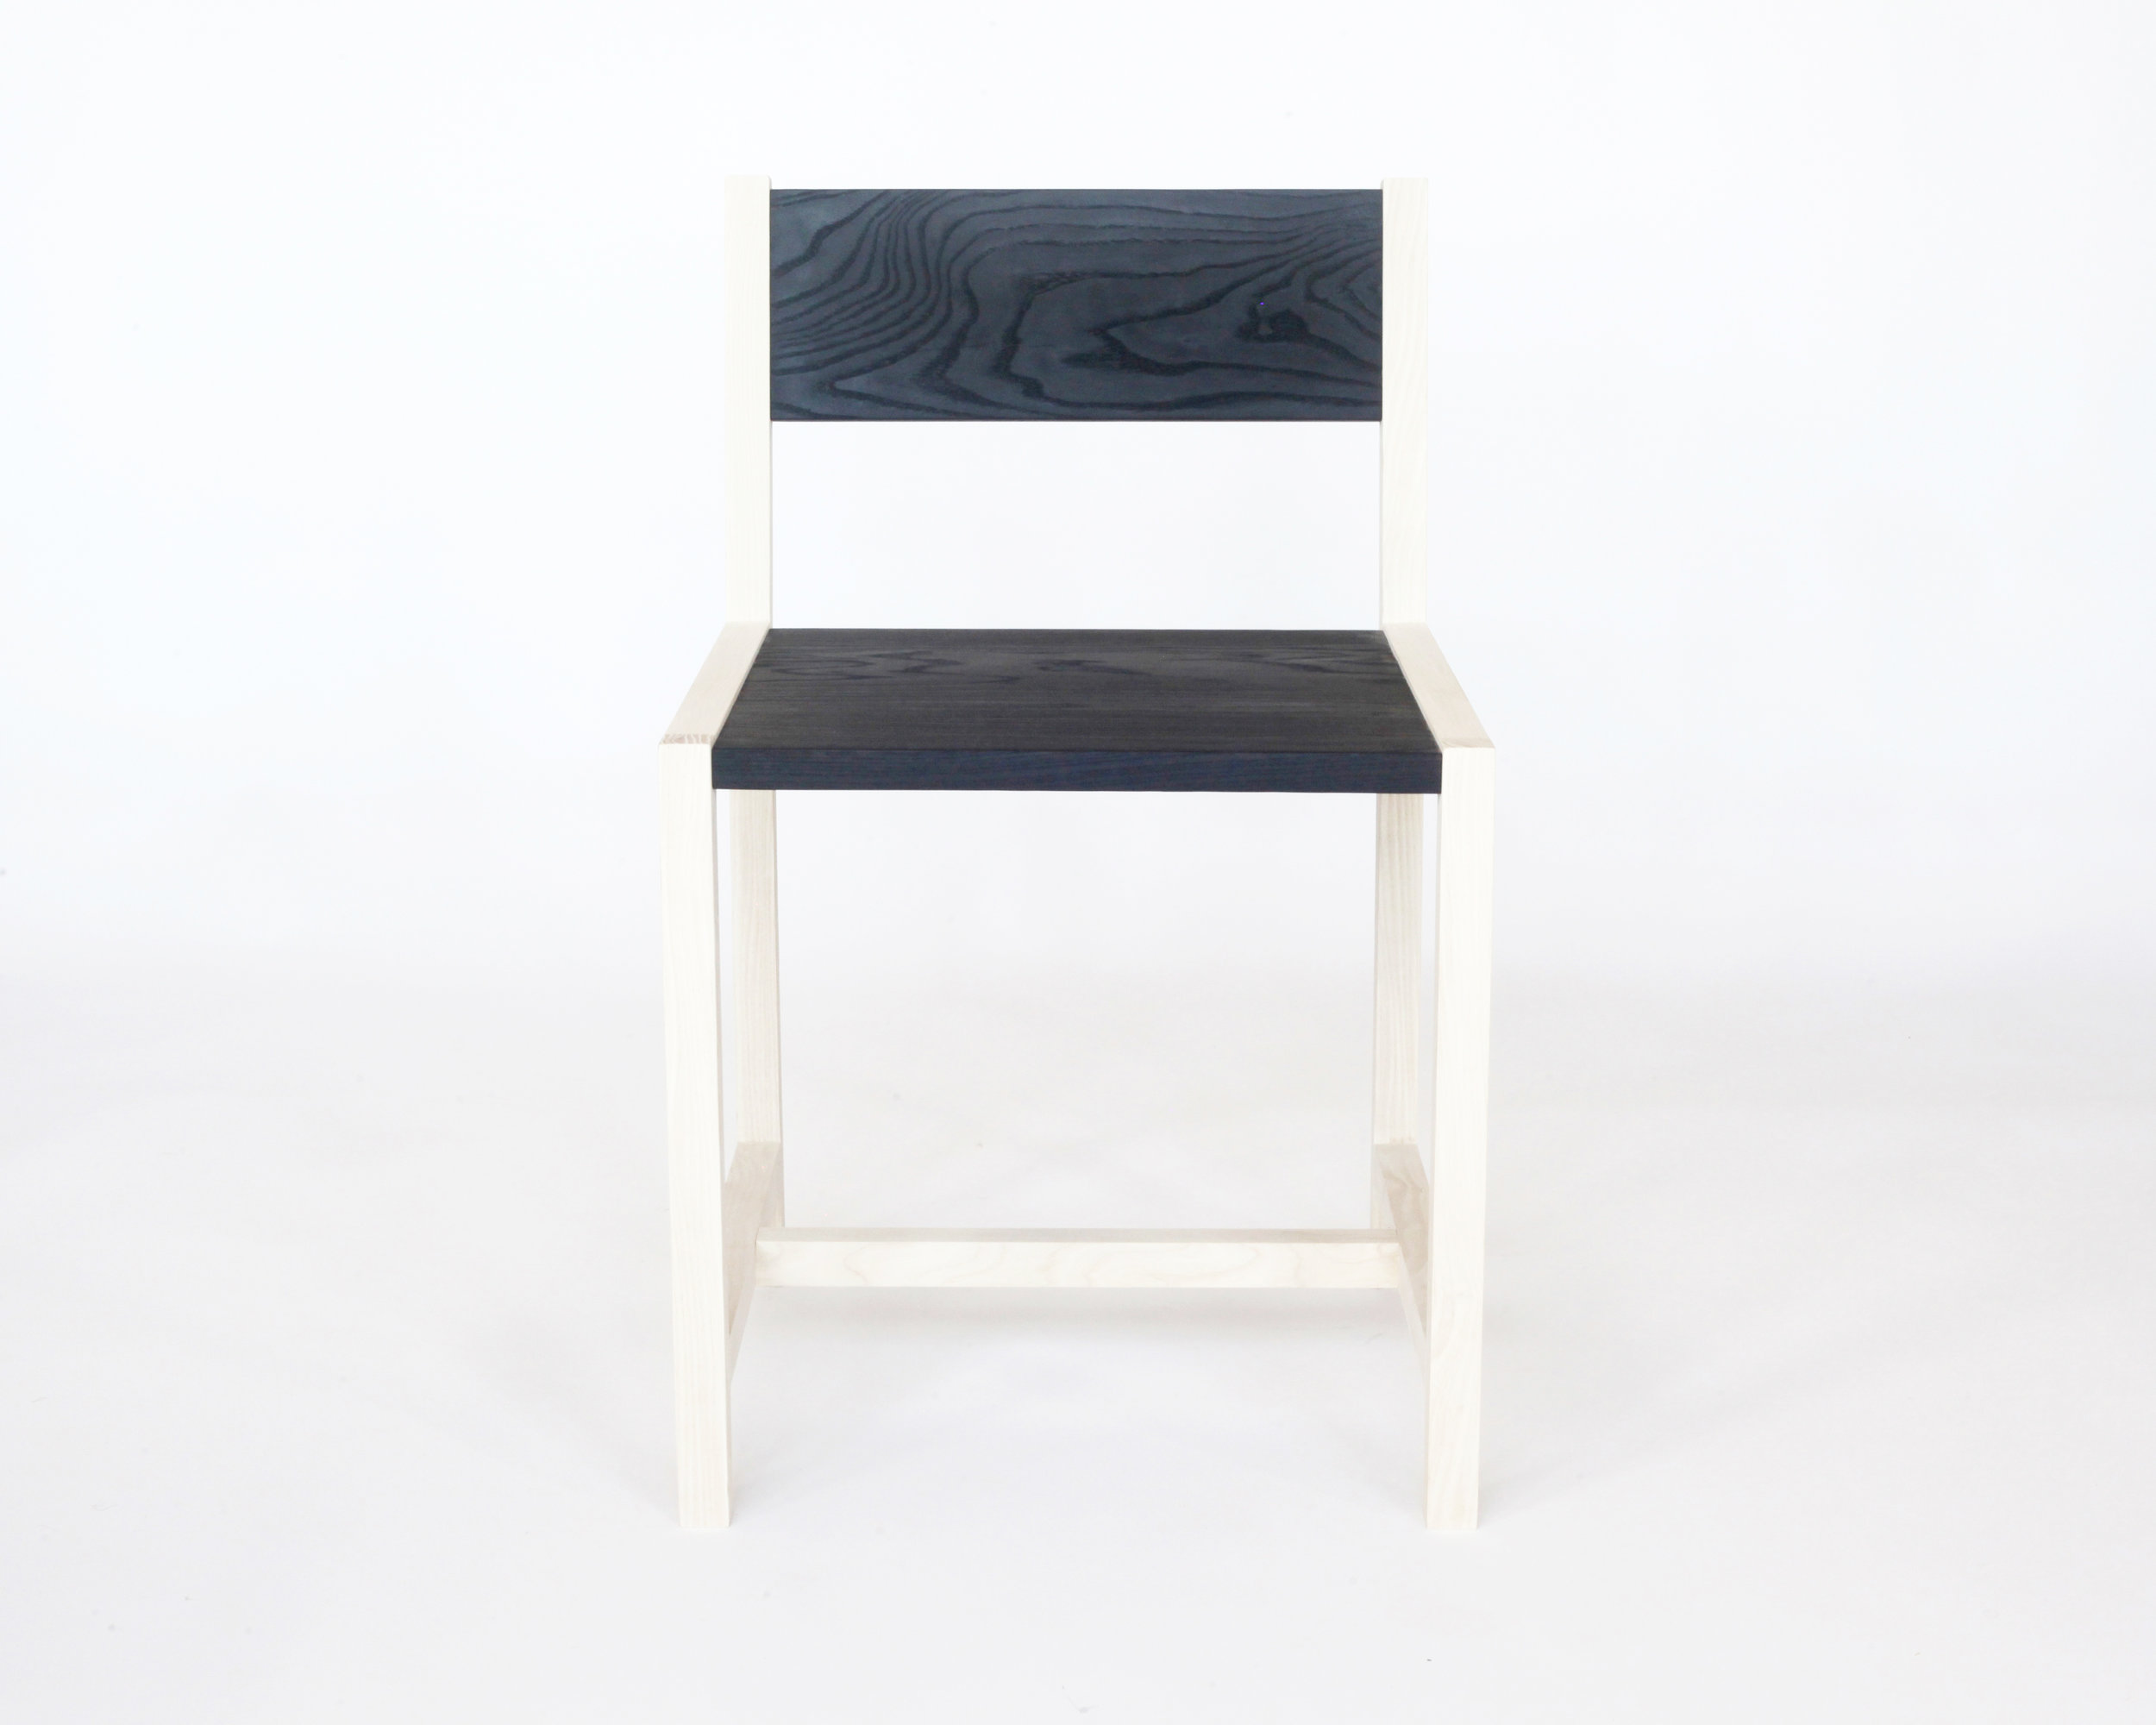  Square chair-  Bleached/charred ash 